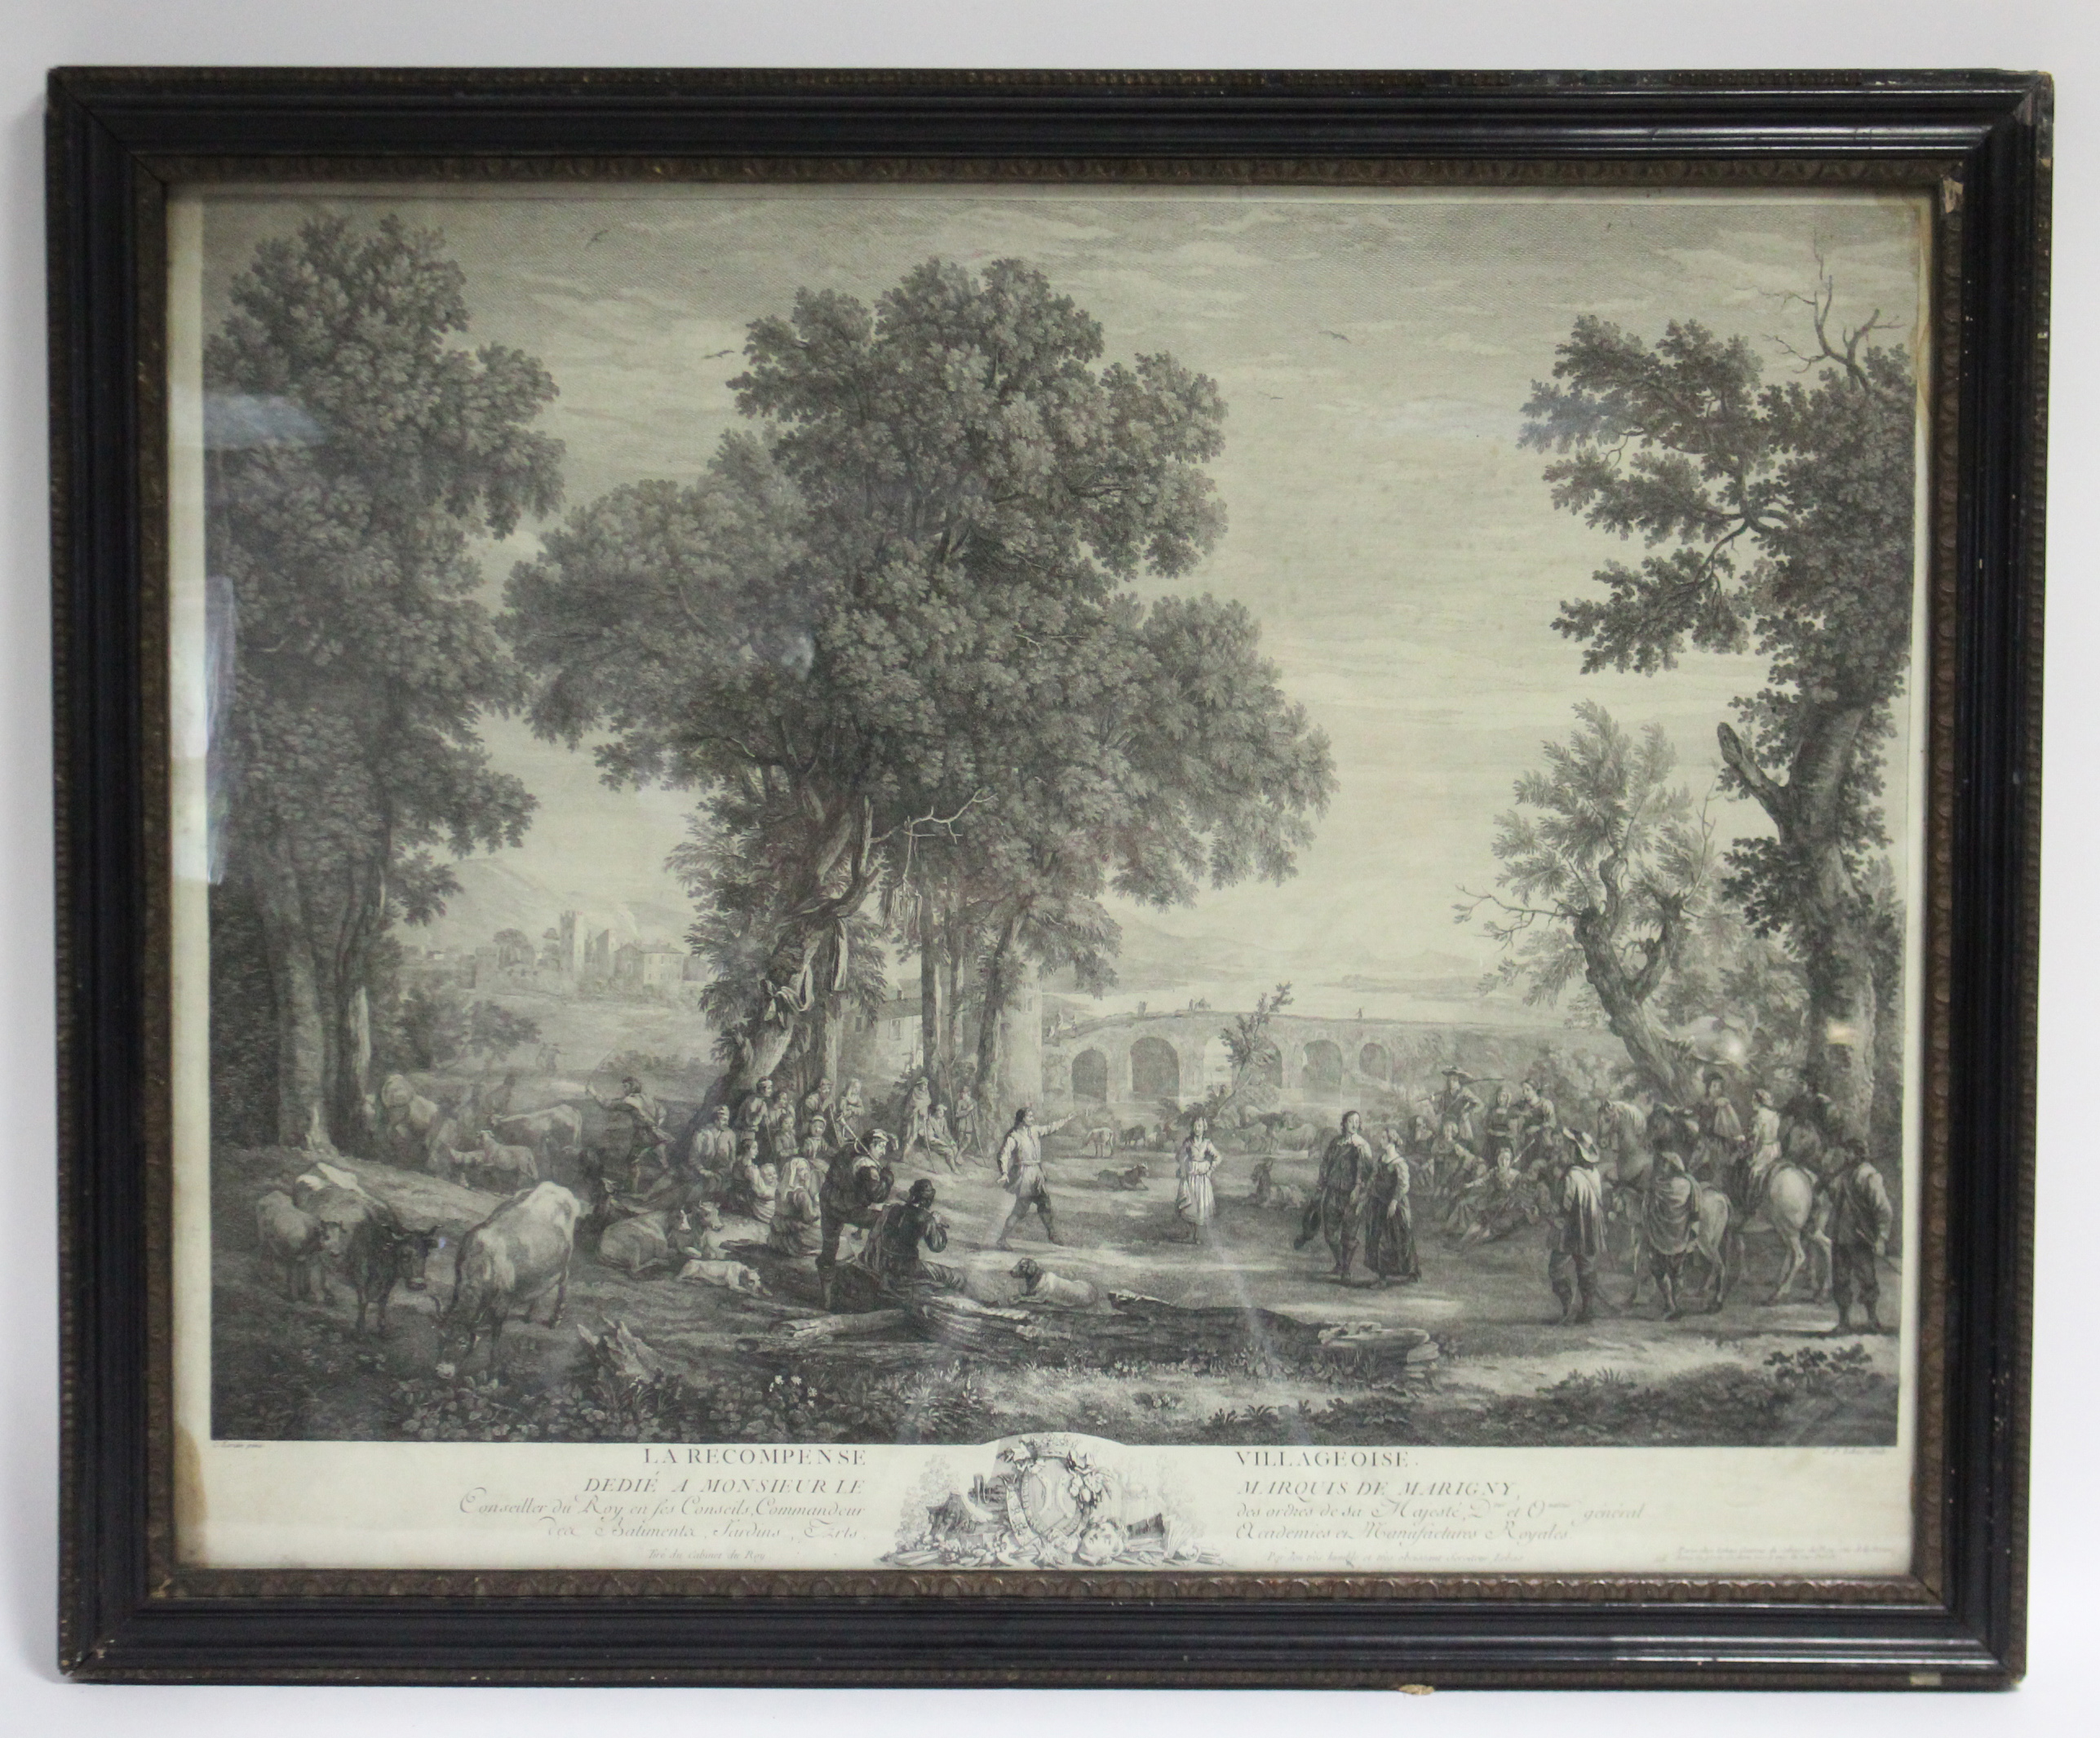 Jacques Philippe Le Bas, after Claude Lorraine. An 18th century black-&-White engraving titled: “